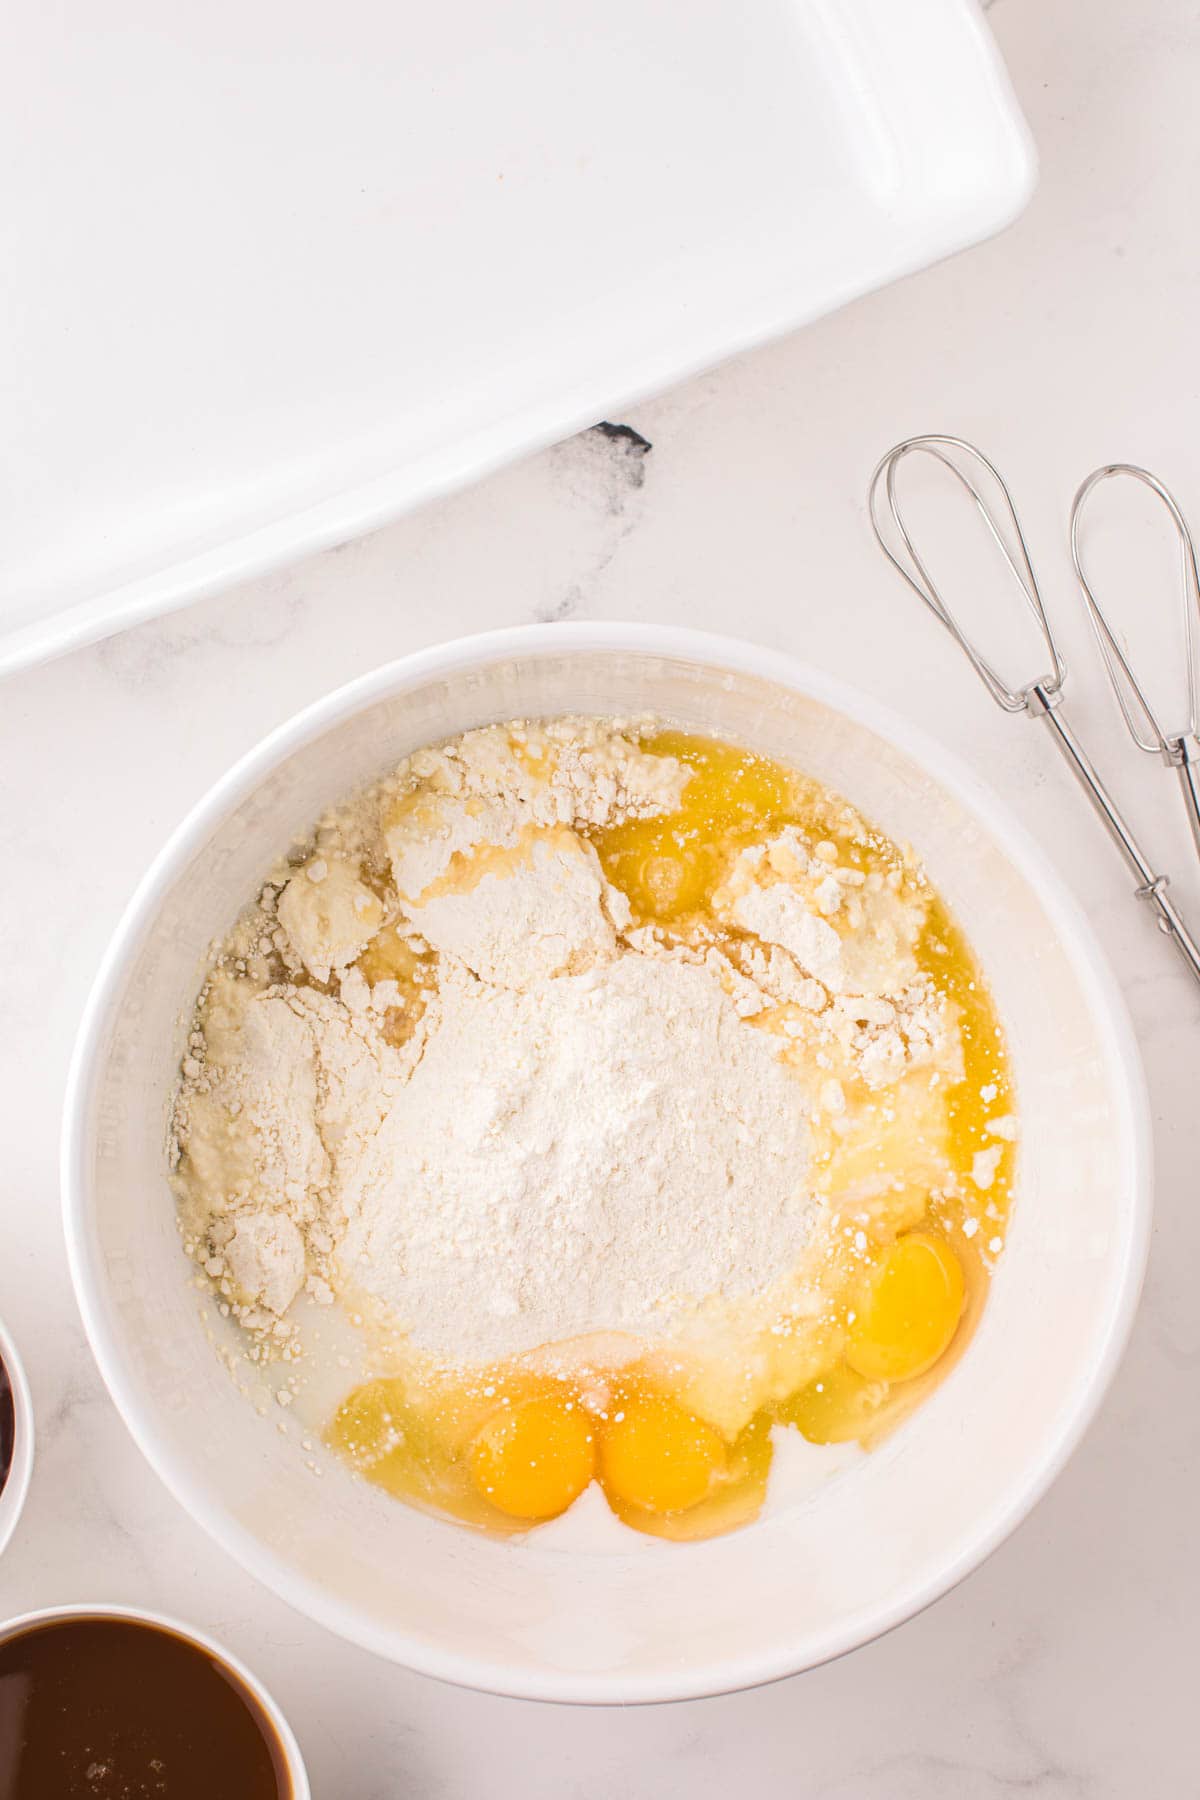 cake mix, eggs, milk and melted butter in a mixing bowl